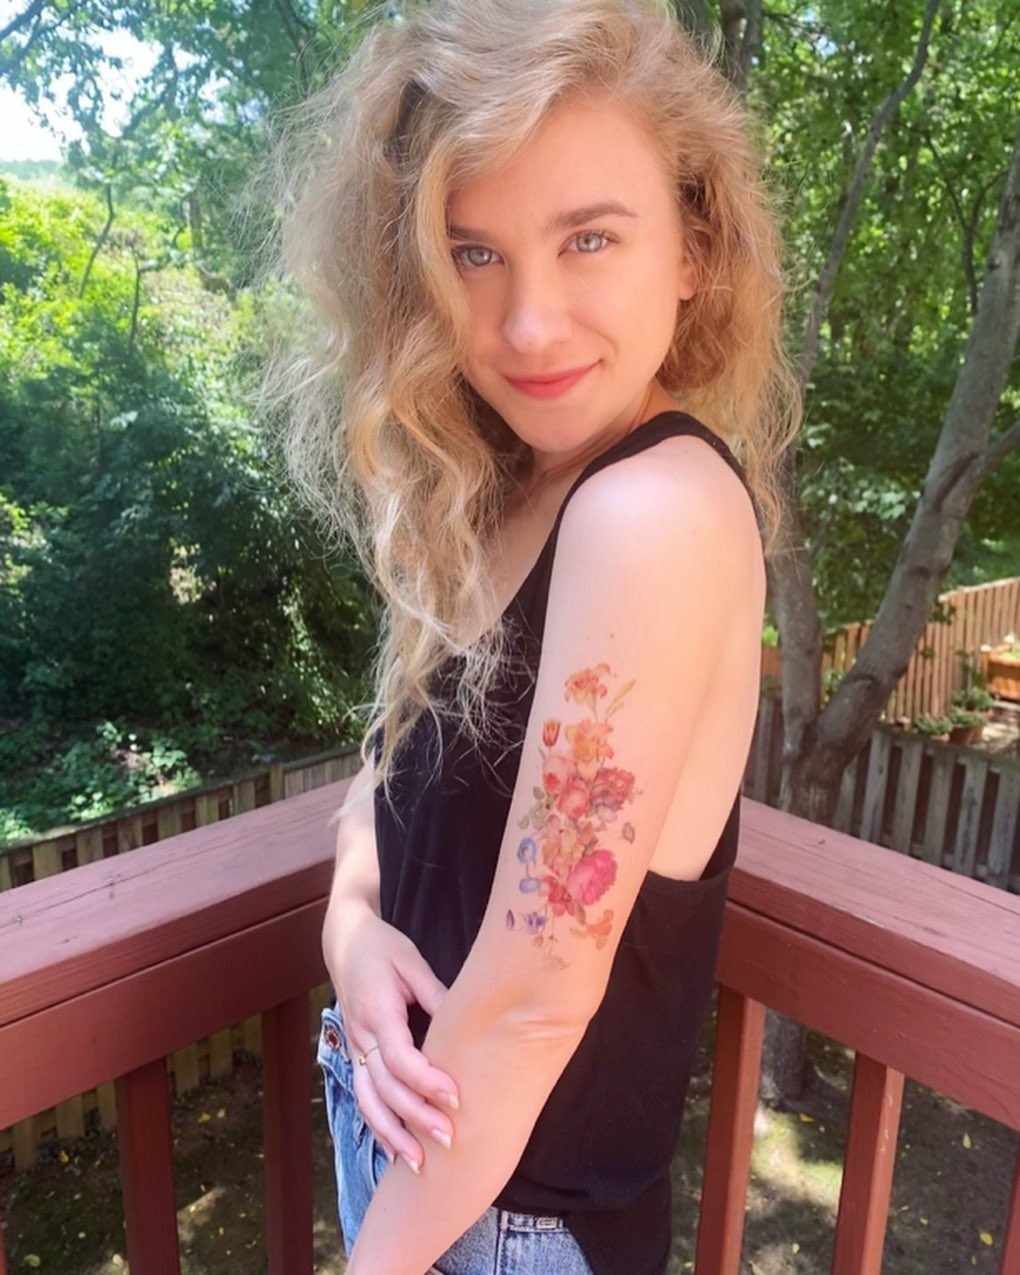 BuzzFeed editor with a floral temporary tattoo on their upper arm